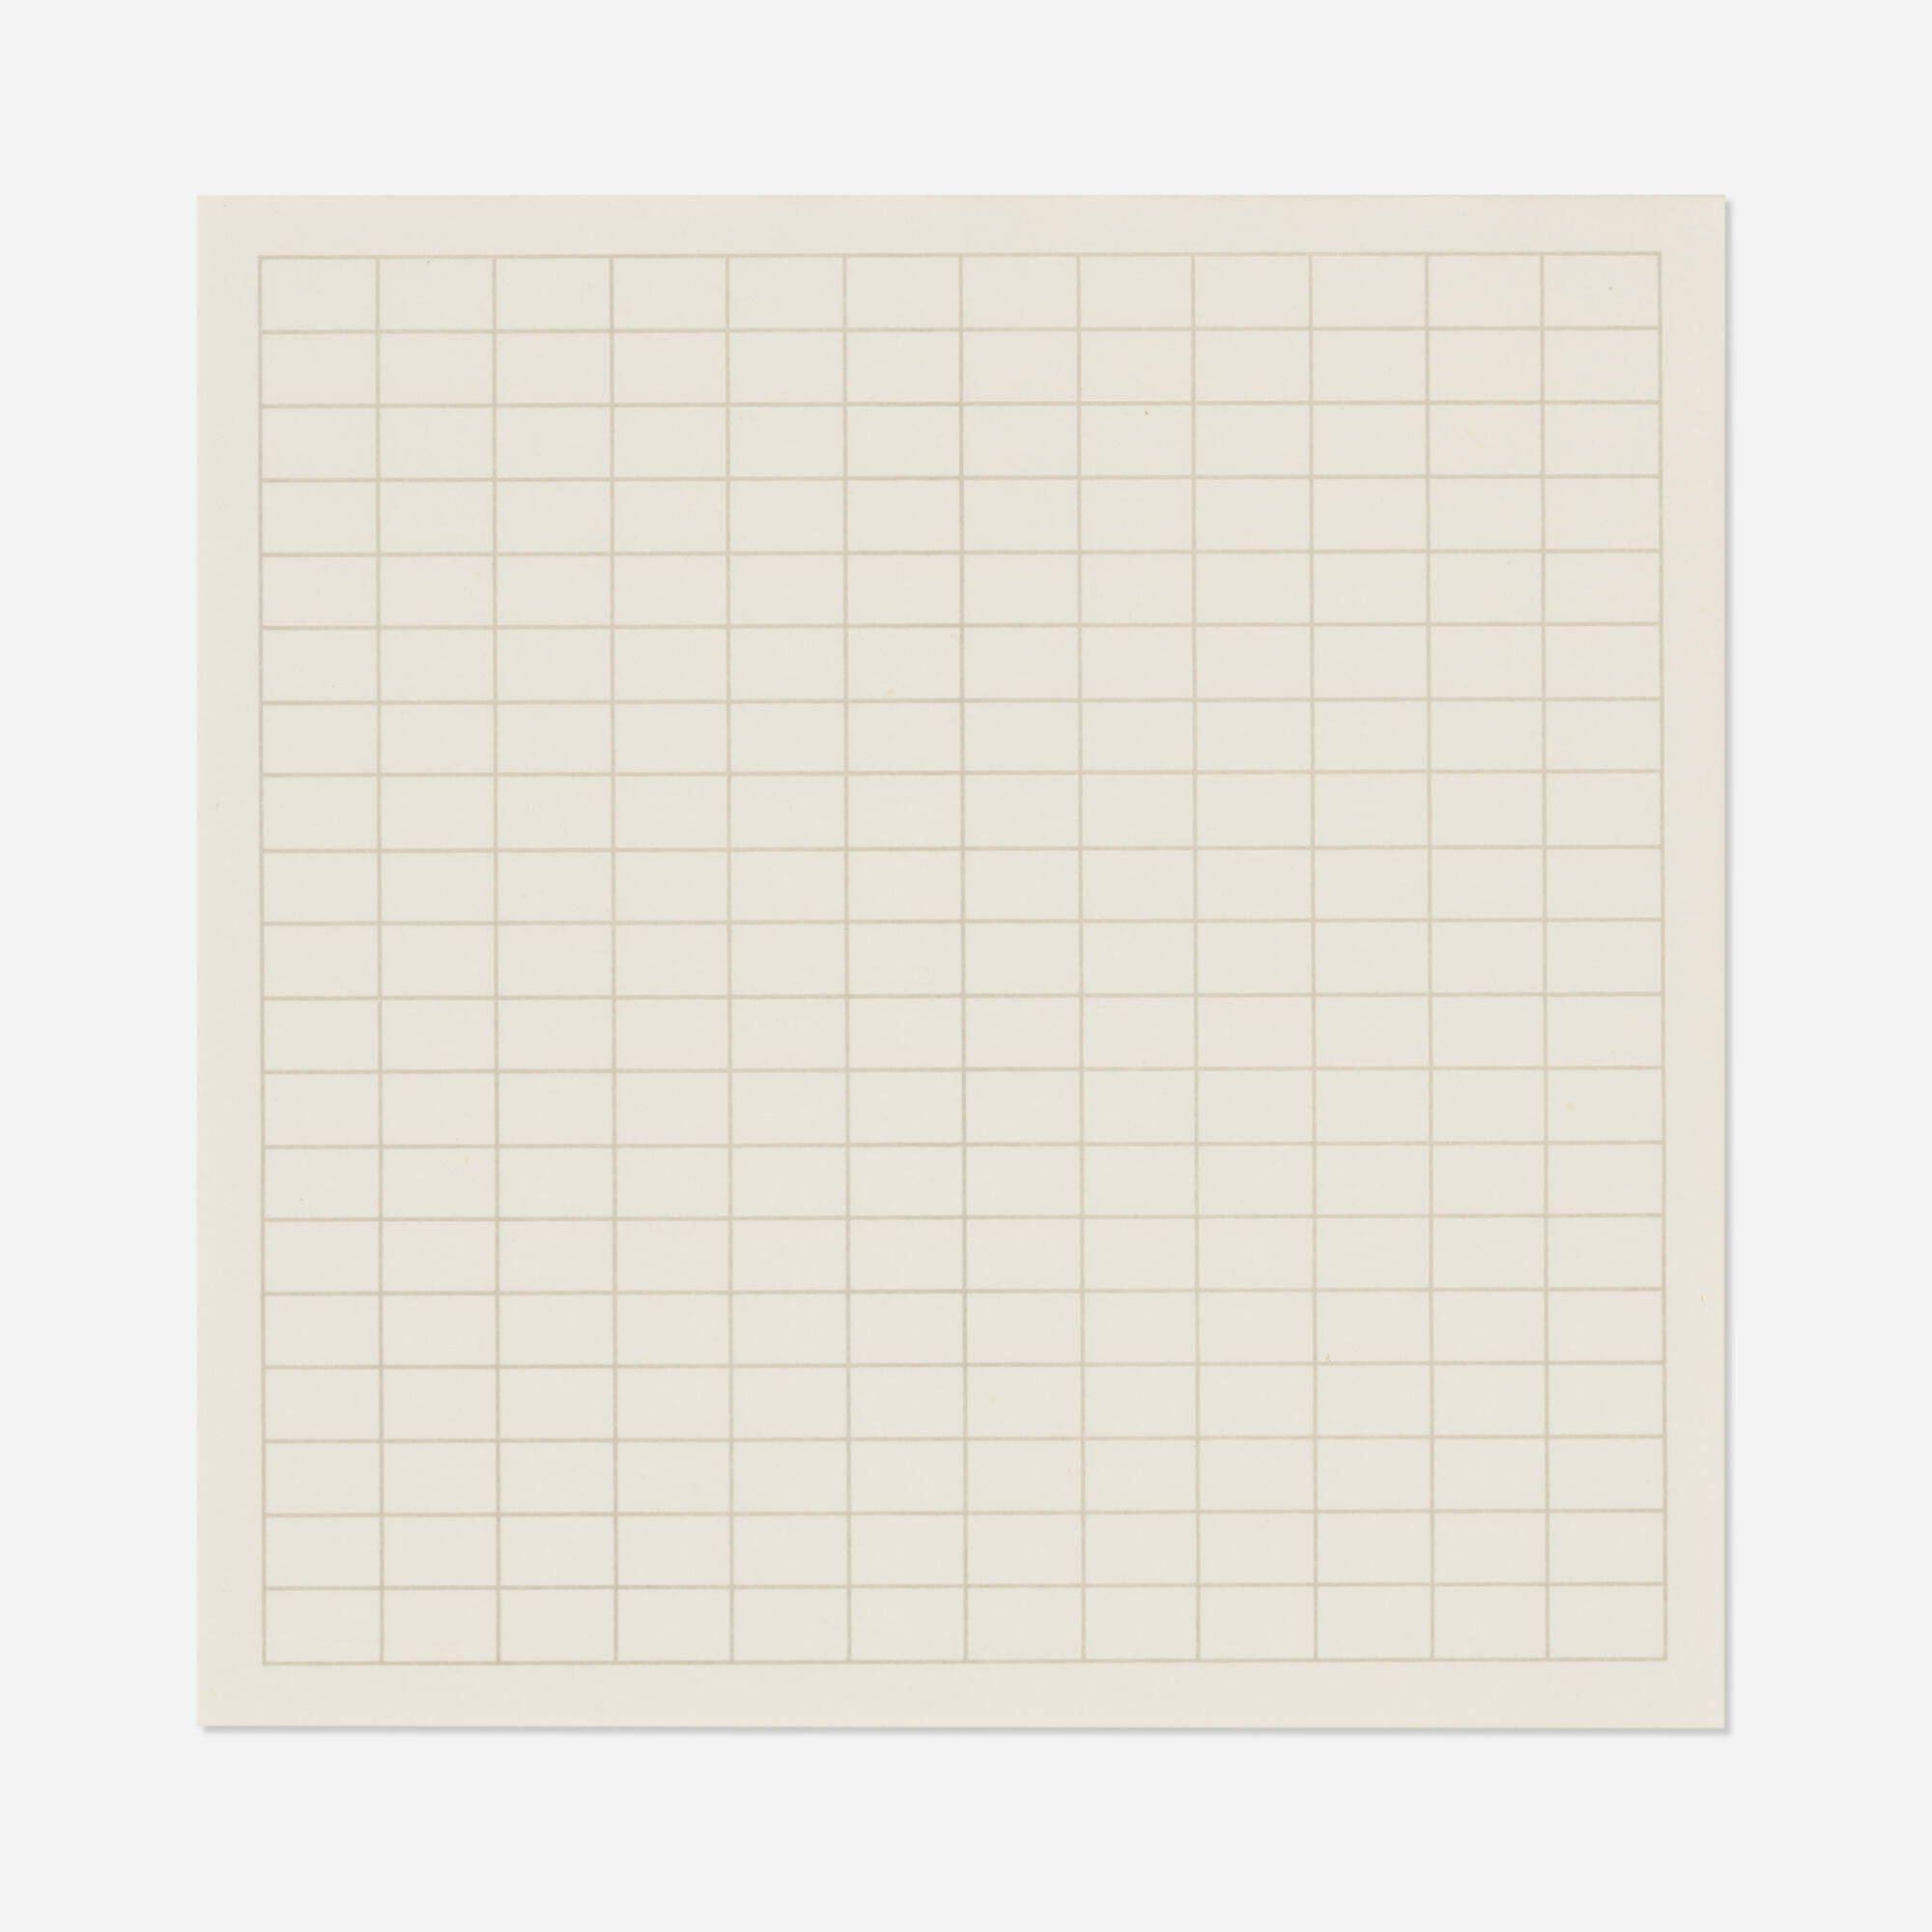 114: AGNES MARTIN, Untitled (from On a Clear Day) < 20|21 Art: The 